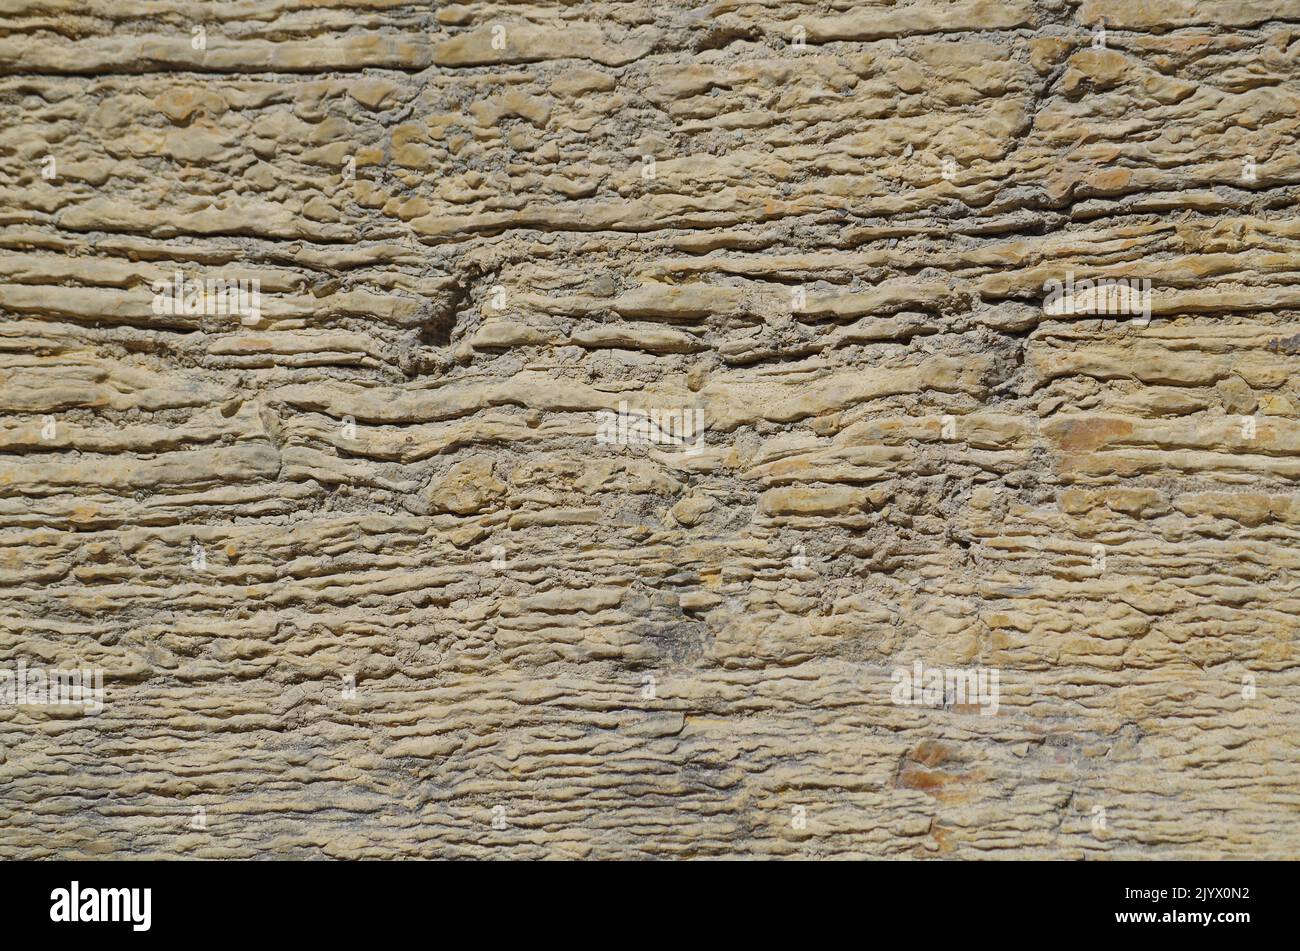 Lime deposit in a Quarry. Stock Photo